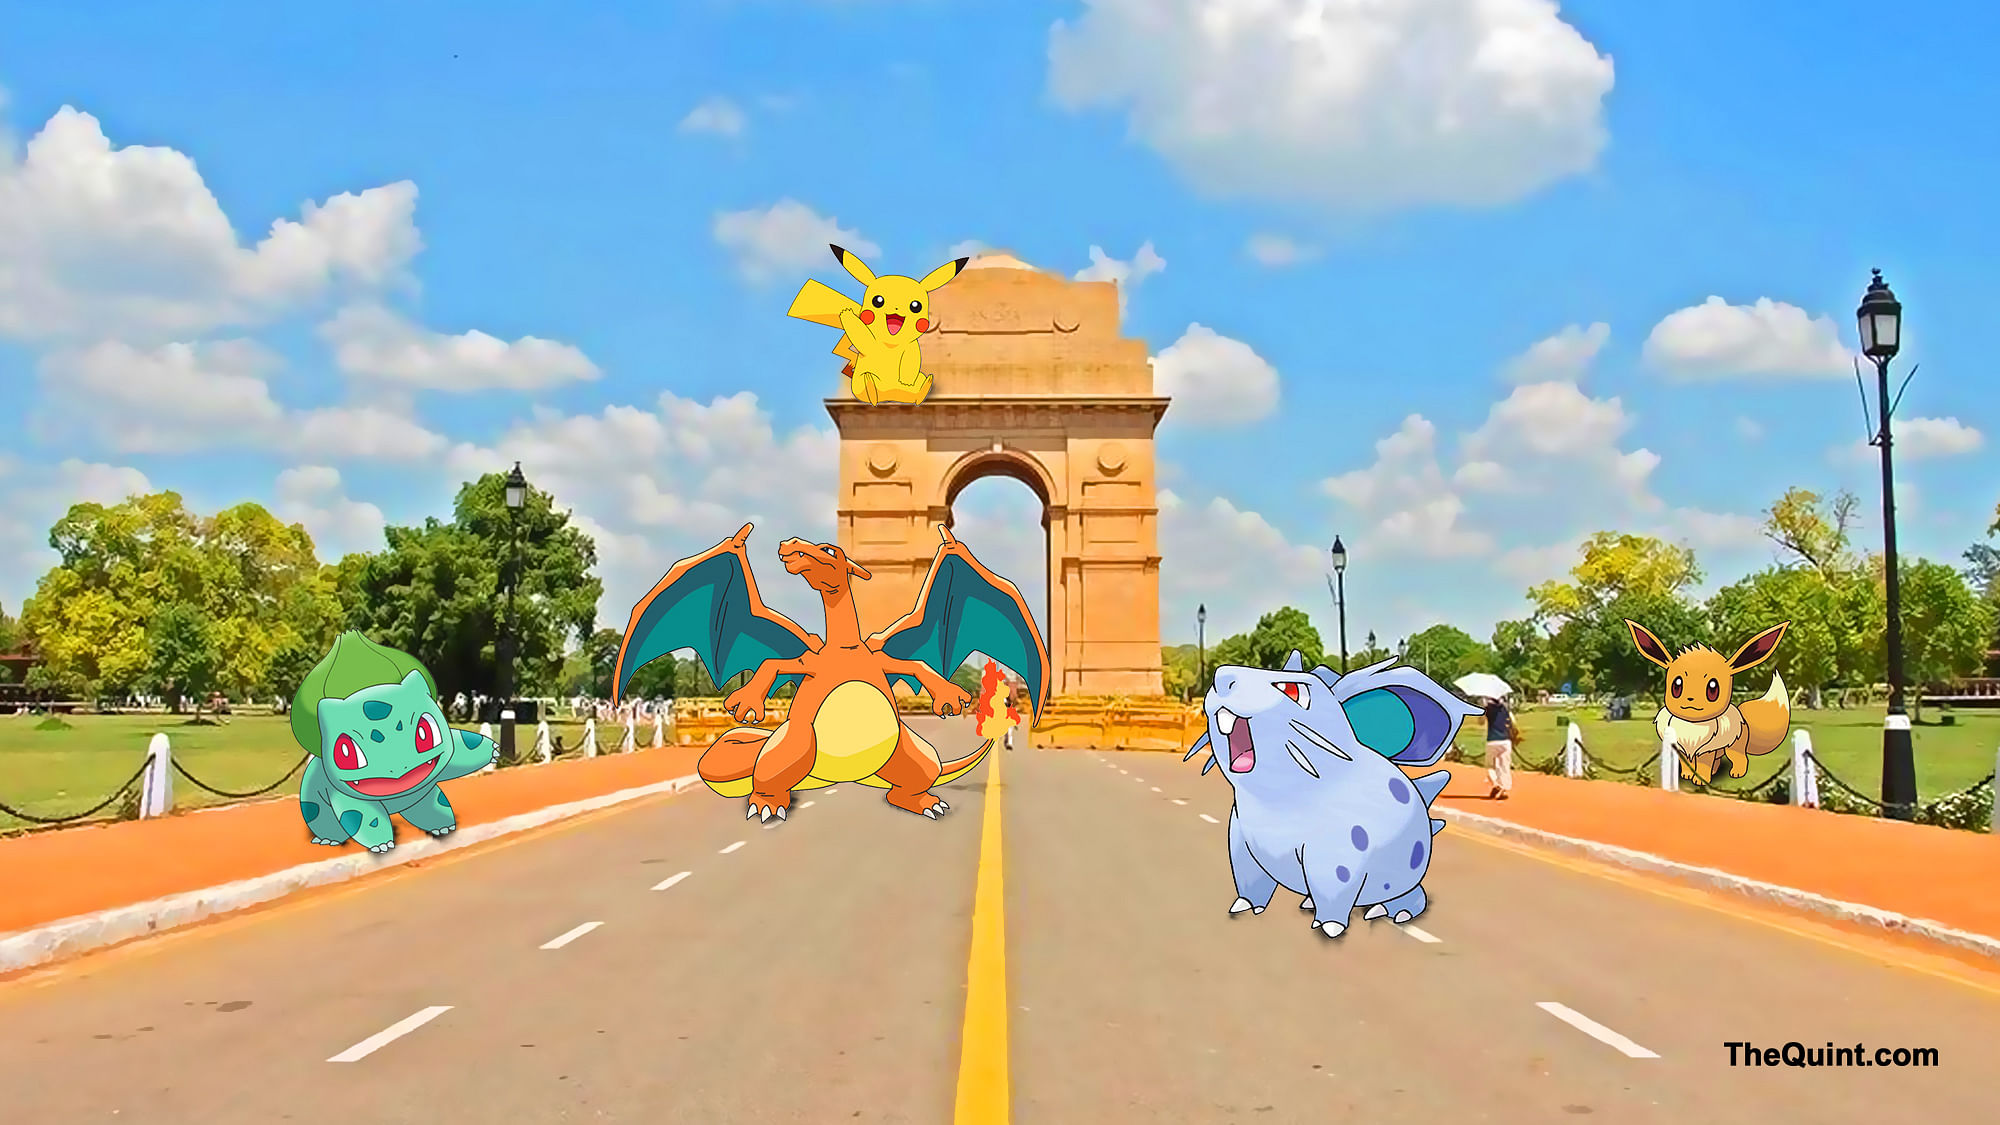 Pokémon Go has made headlines all over the world within days of its launch. (Photo: <b>The Quint</b>)